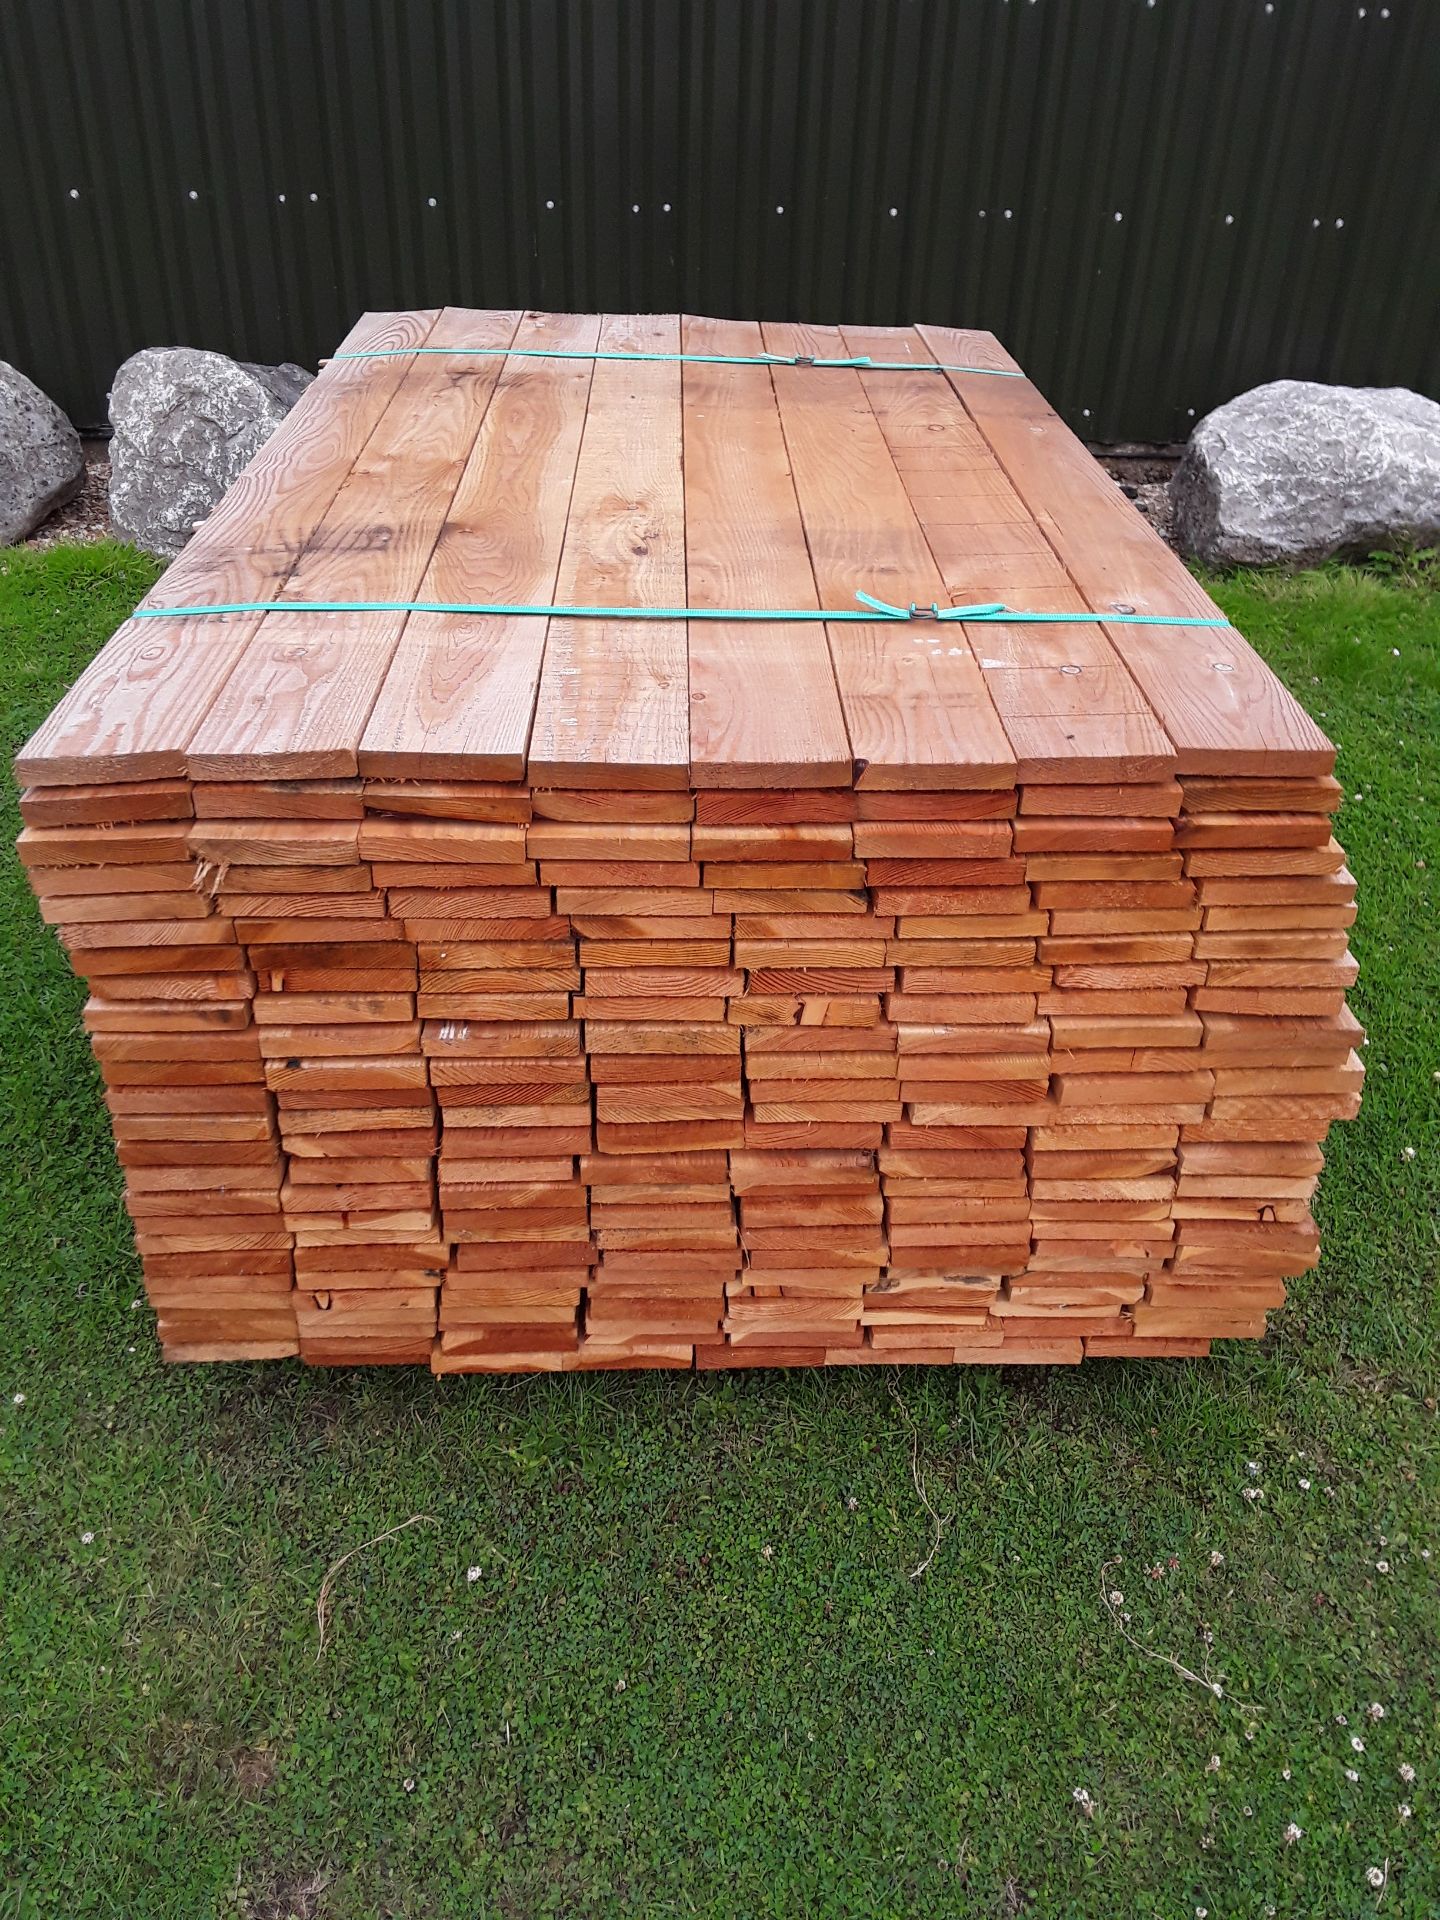 50x Softwood Fresh Sawn Mixed Larch / Douglas Fir Boards / Planks / Cladding 1" x 6" x 6FT - Image 3 of 4